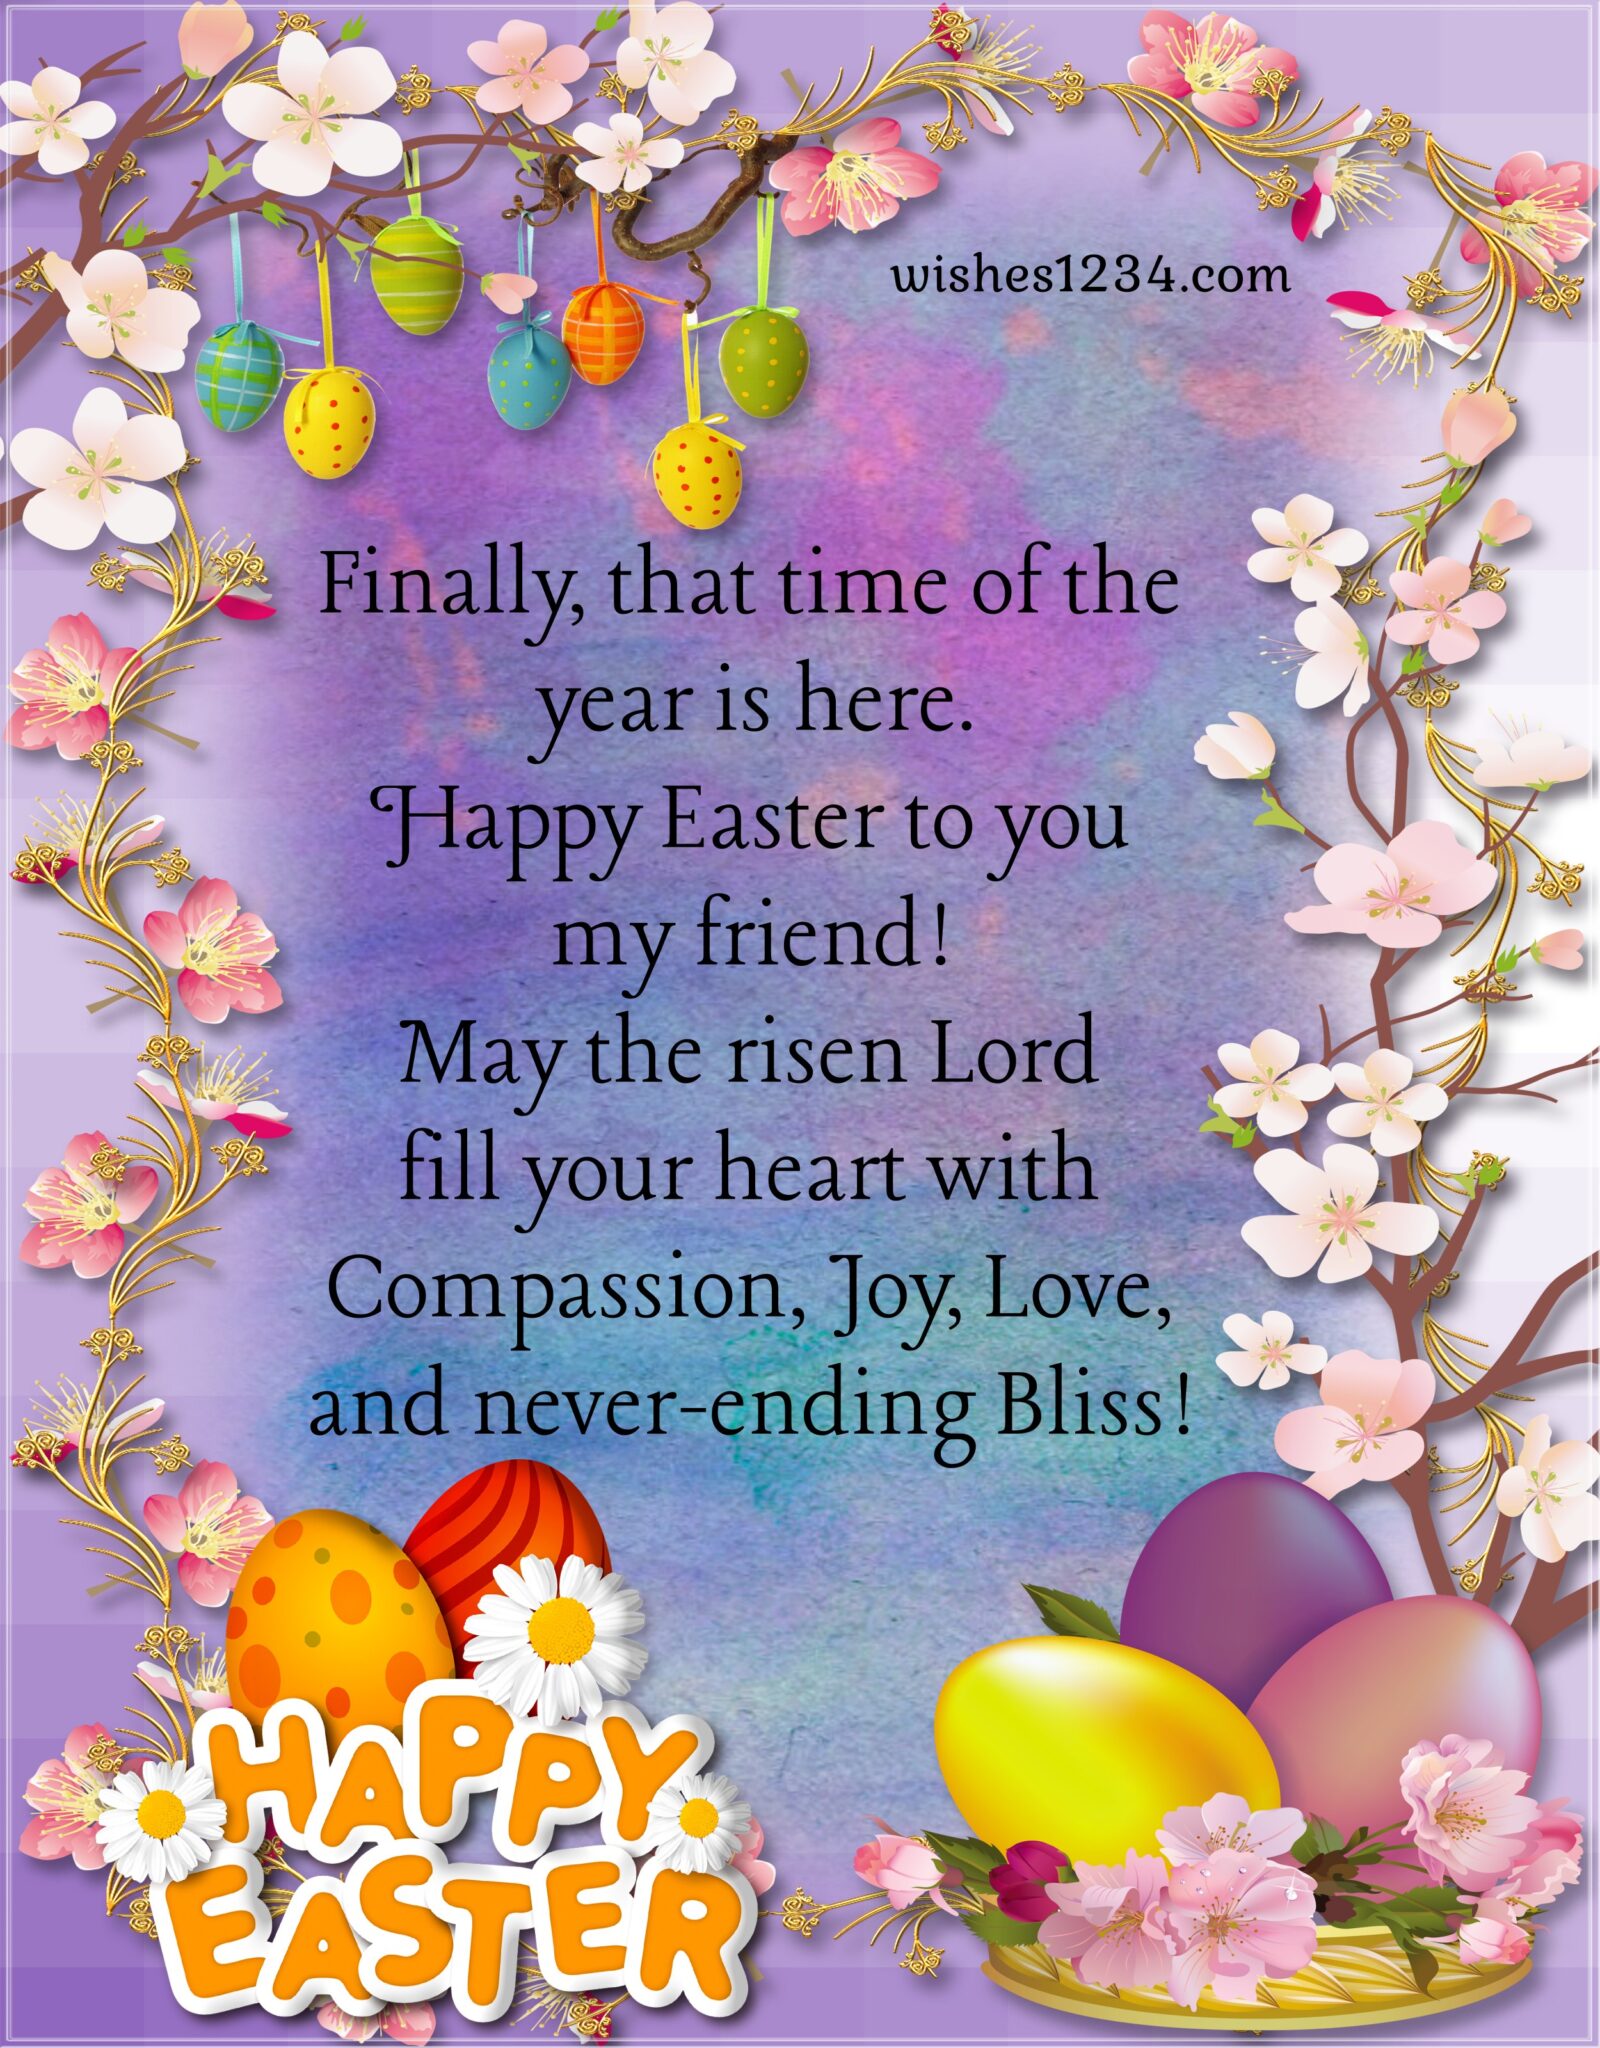 150 Easter Greetings Easter Wishes Happy Easter Images Wishes1234 